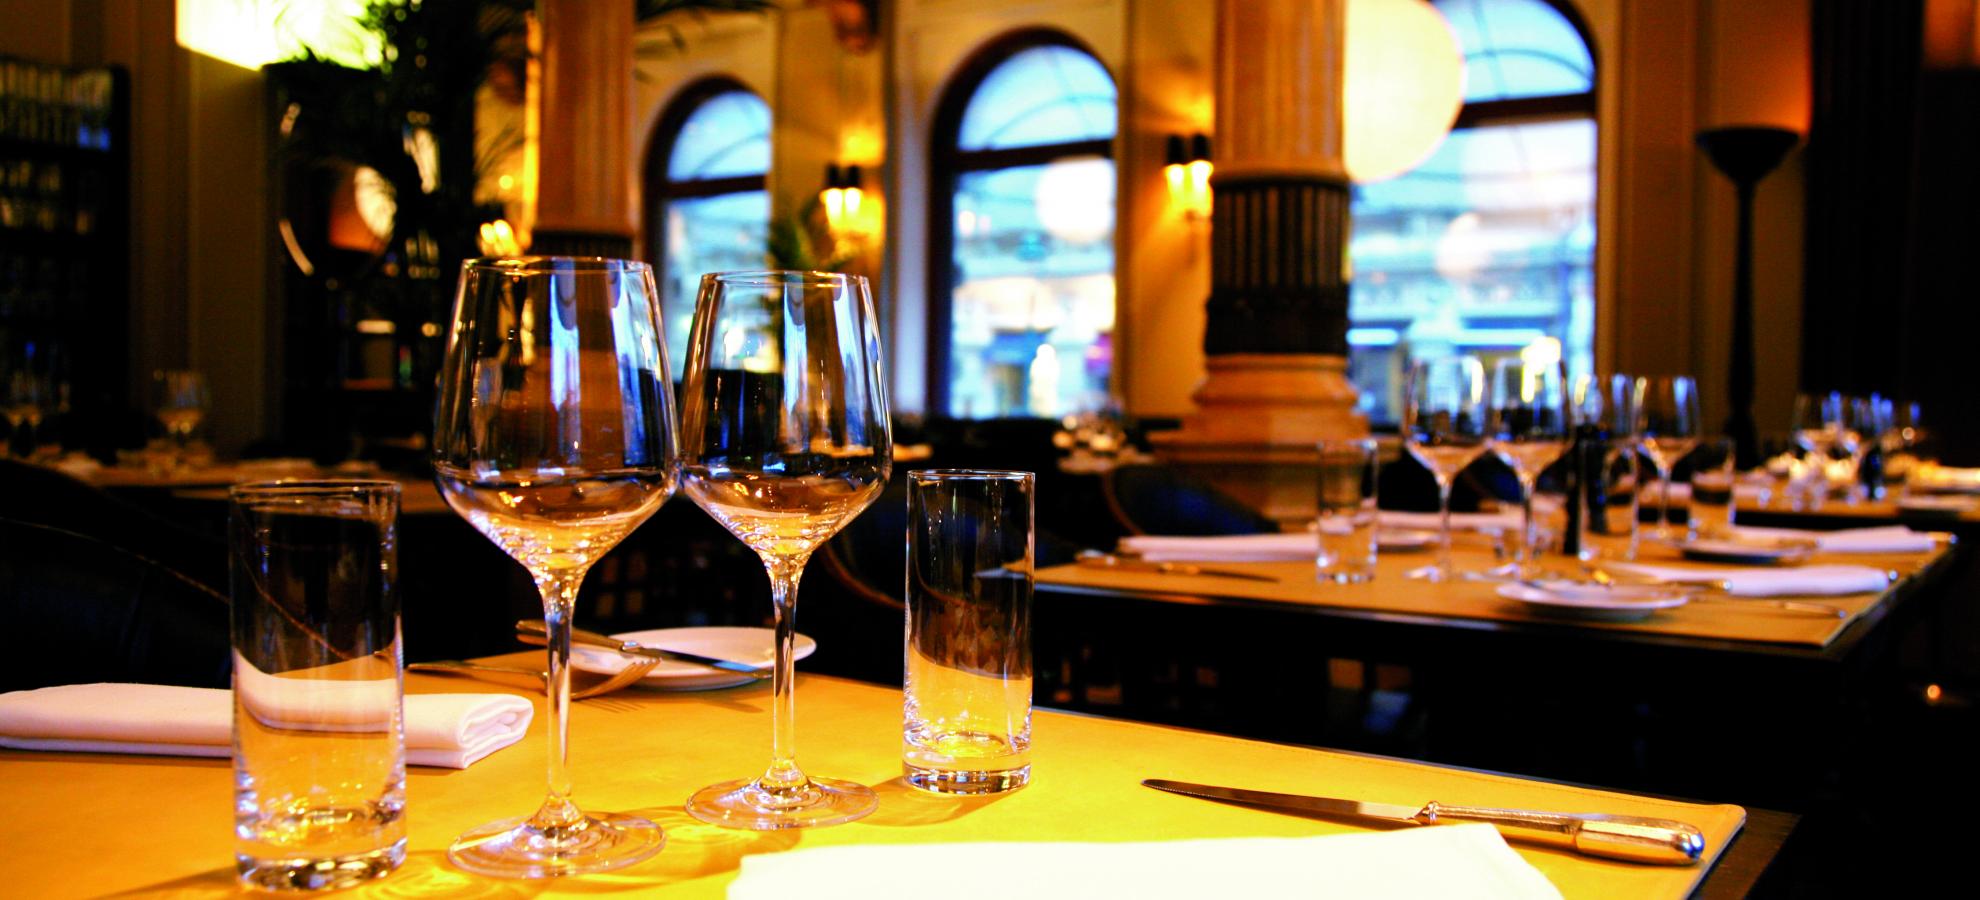 Inside Brasserie Kämp, dozens of tables have been set with fine glassware, tall windows on the far side of the room with columns standing in front of them. The lighting is gentle and looks golden.